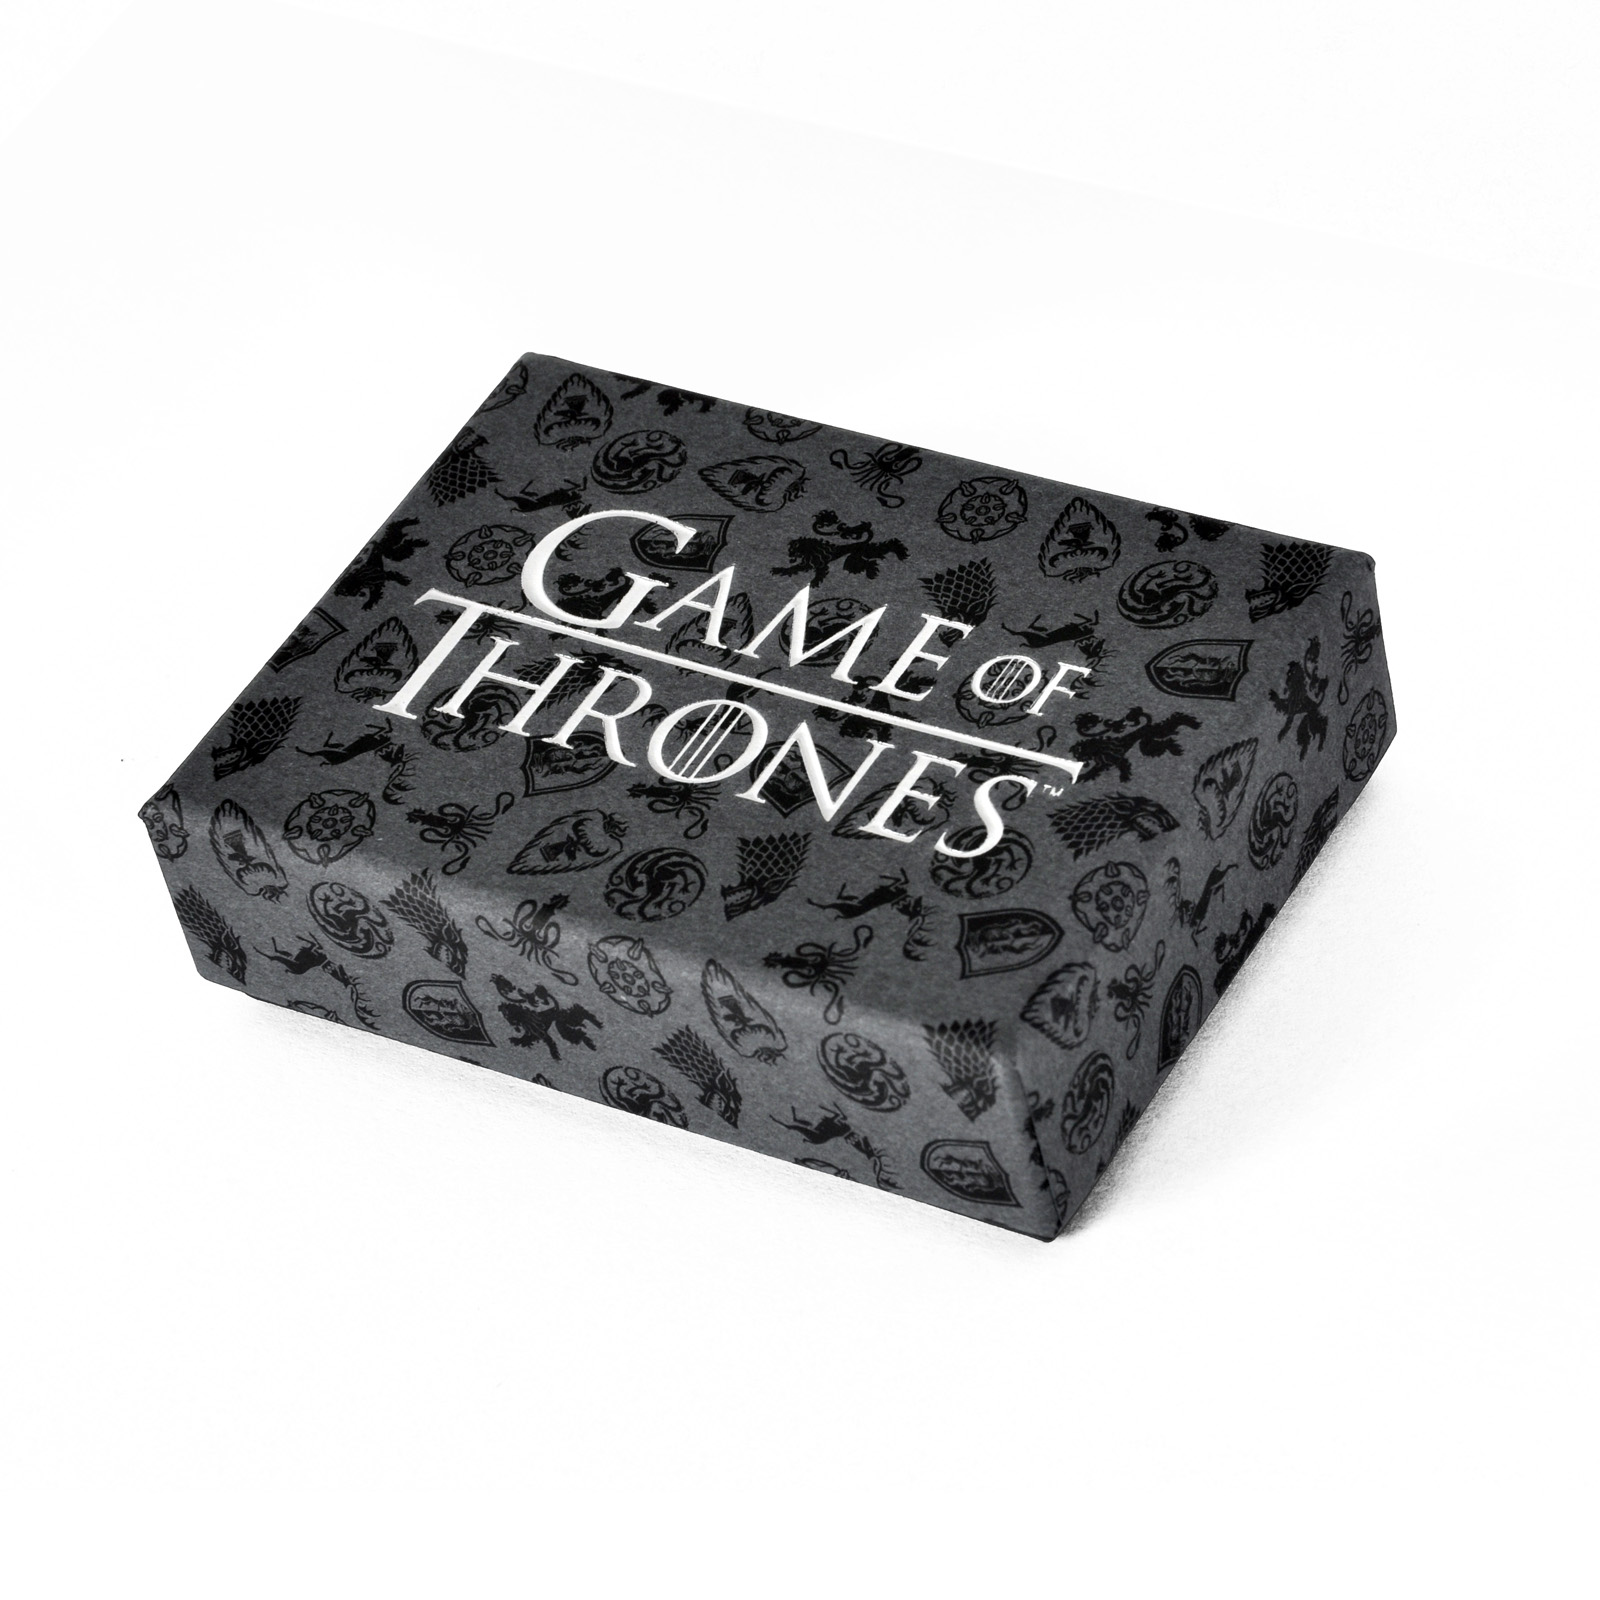 Game of Thrones - Cersei Lannister Kette